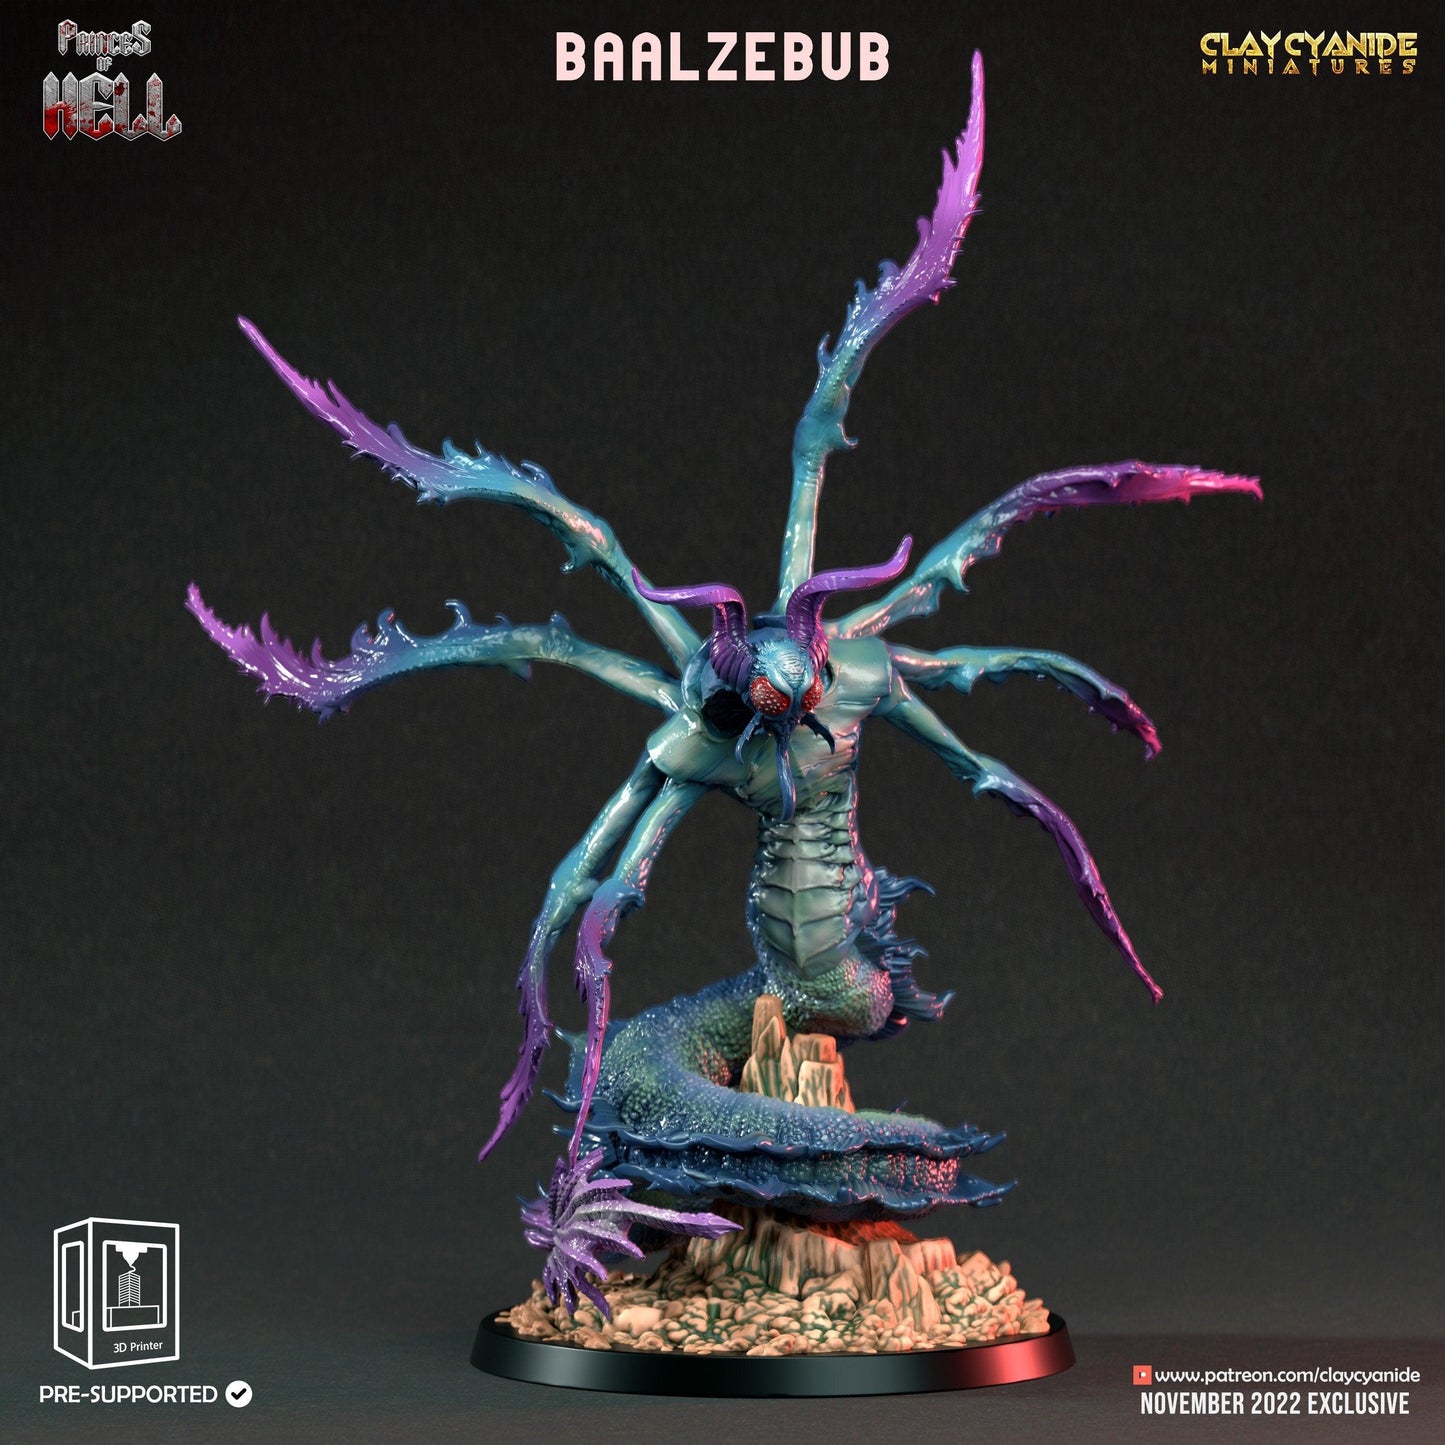 Beelzebub Miniature | Clay Cyanide | Princes of Hell | Tabletop Gaming | DnD Demon Miniature | Dungeons and Dragons DnD 5e Satan - Plague Miniatures shop for DnD Miniatures